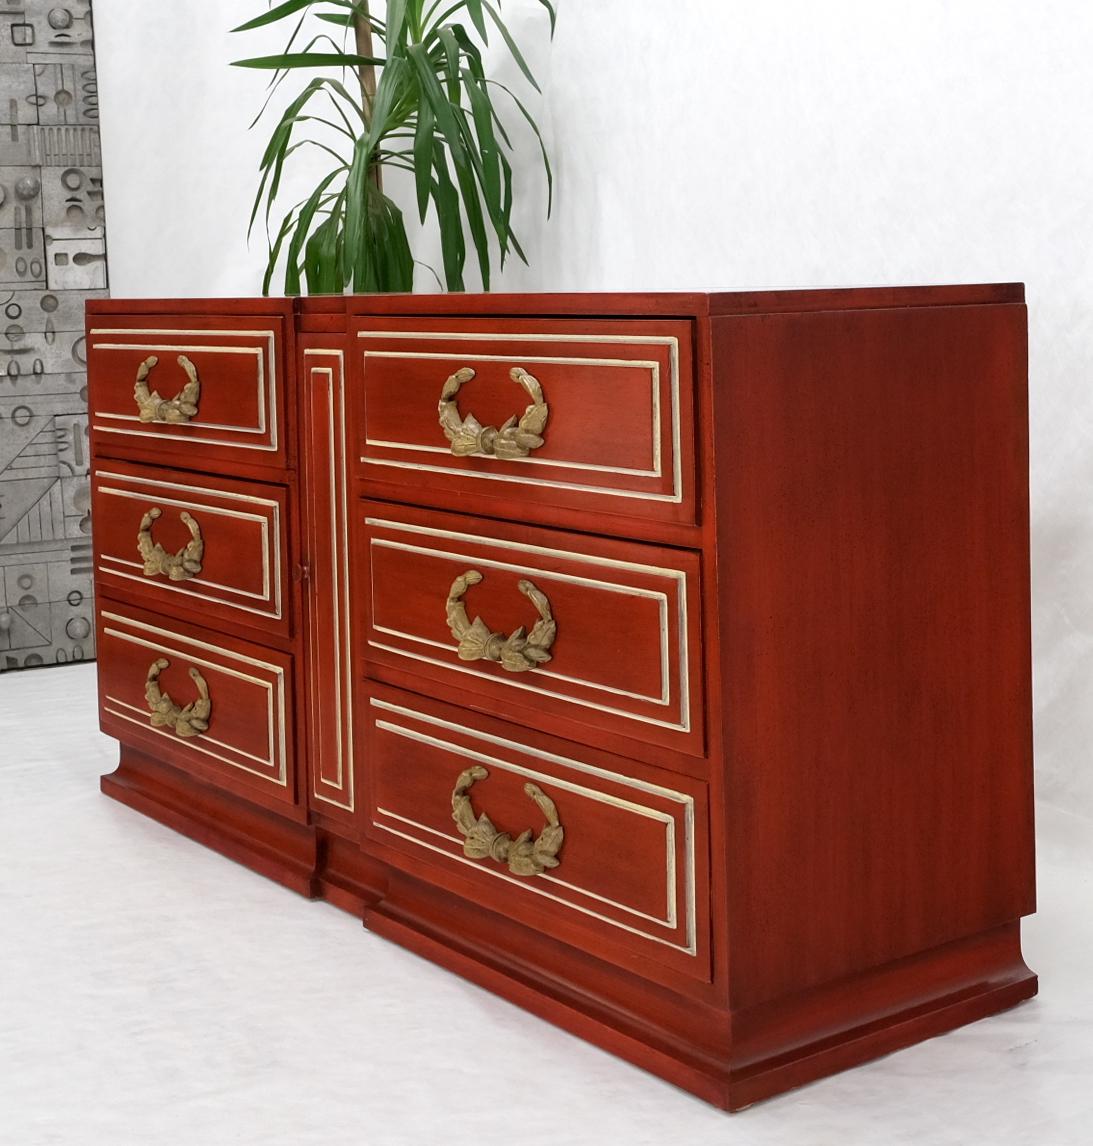 Directoire Style Blood Tomato Red Lacquer Super Heavy Solid Brass Pulls Dresser In Good Condition For Sale In Rockaway, NJ